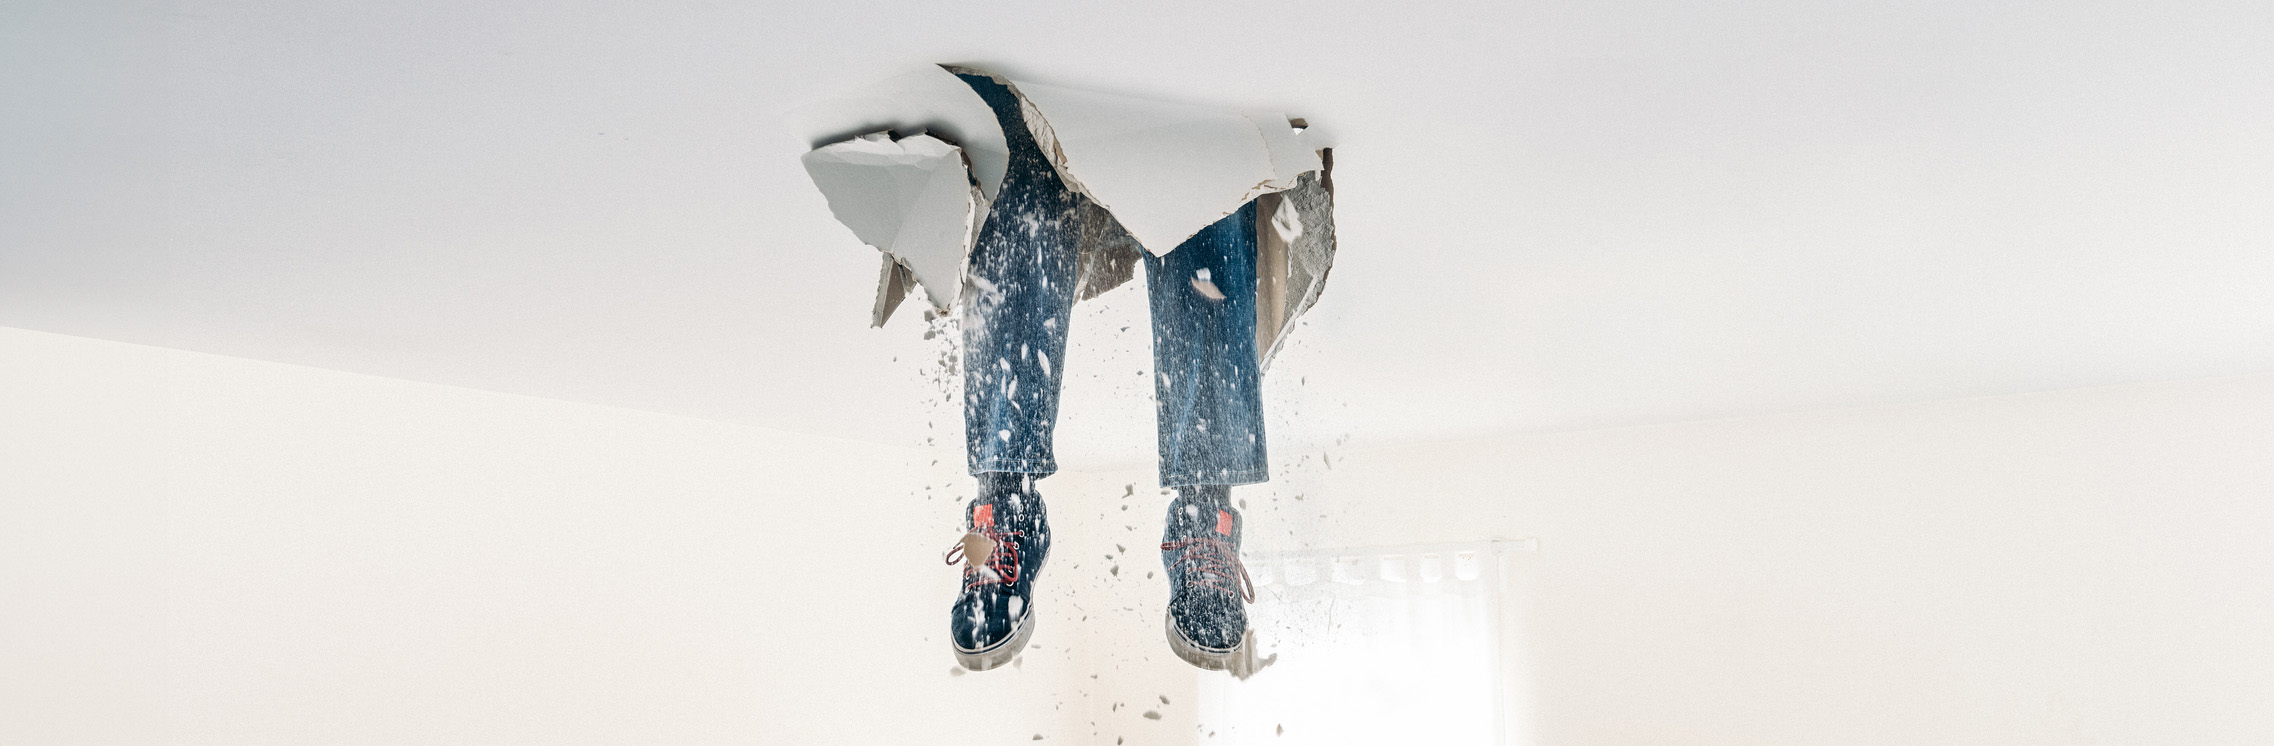 Person's legs break through ceiling drywall and are dangling